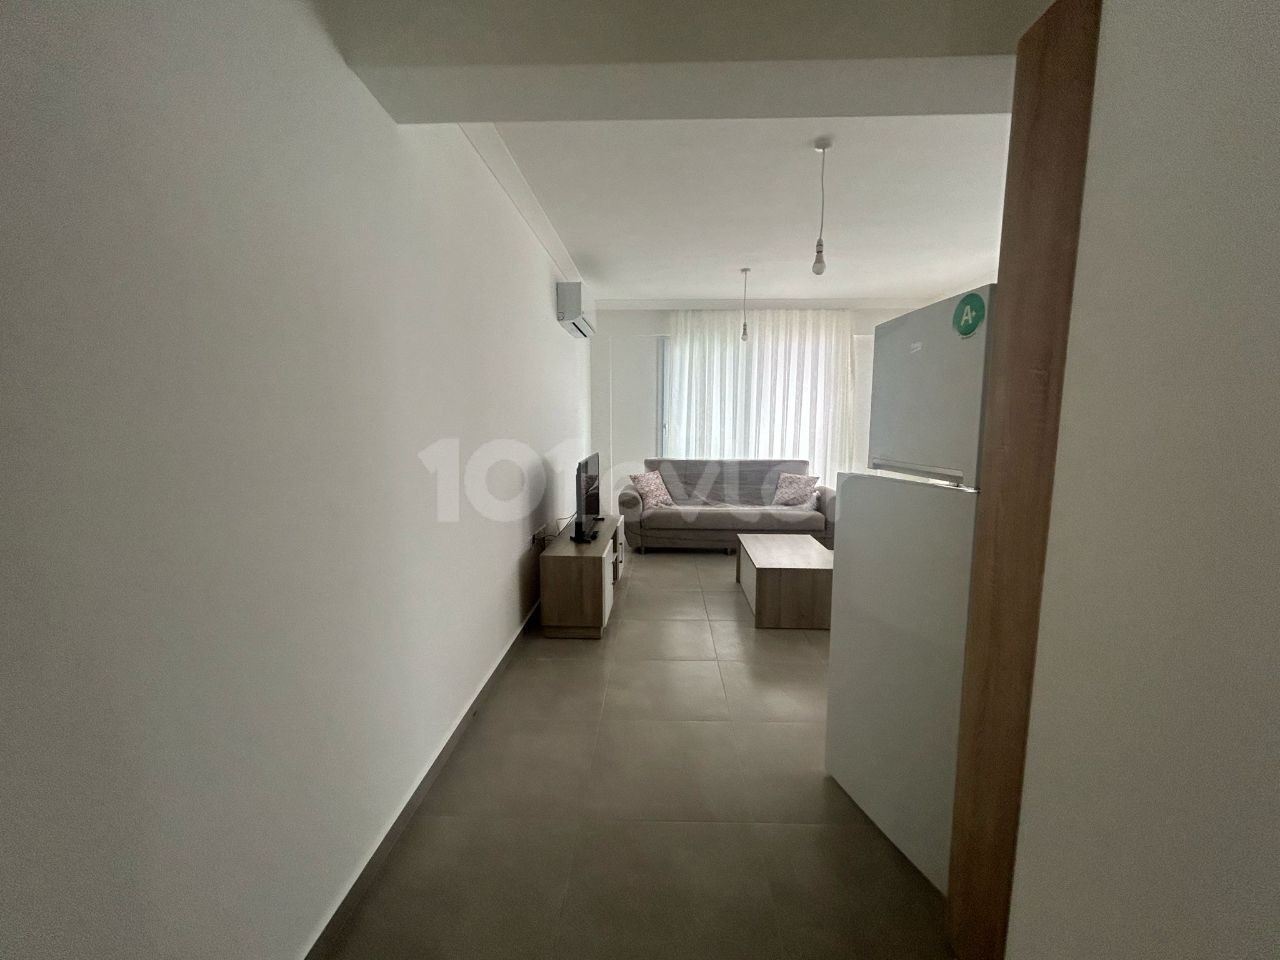 2+1 flat for rent within walking distance to all amenities near Kyrenia Central Kar Market